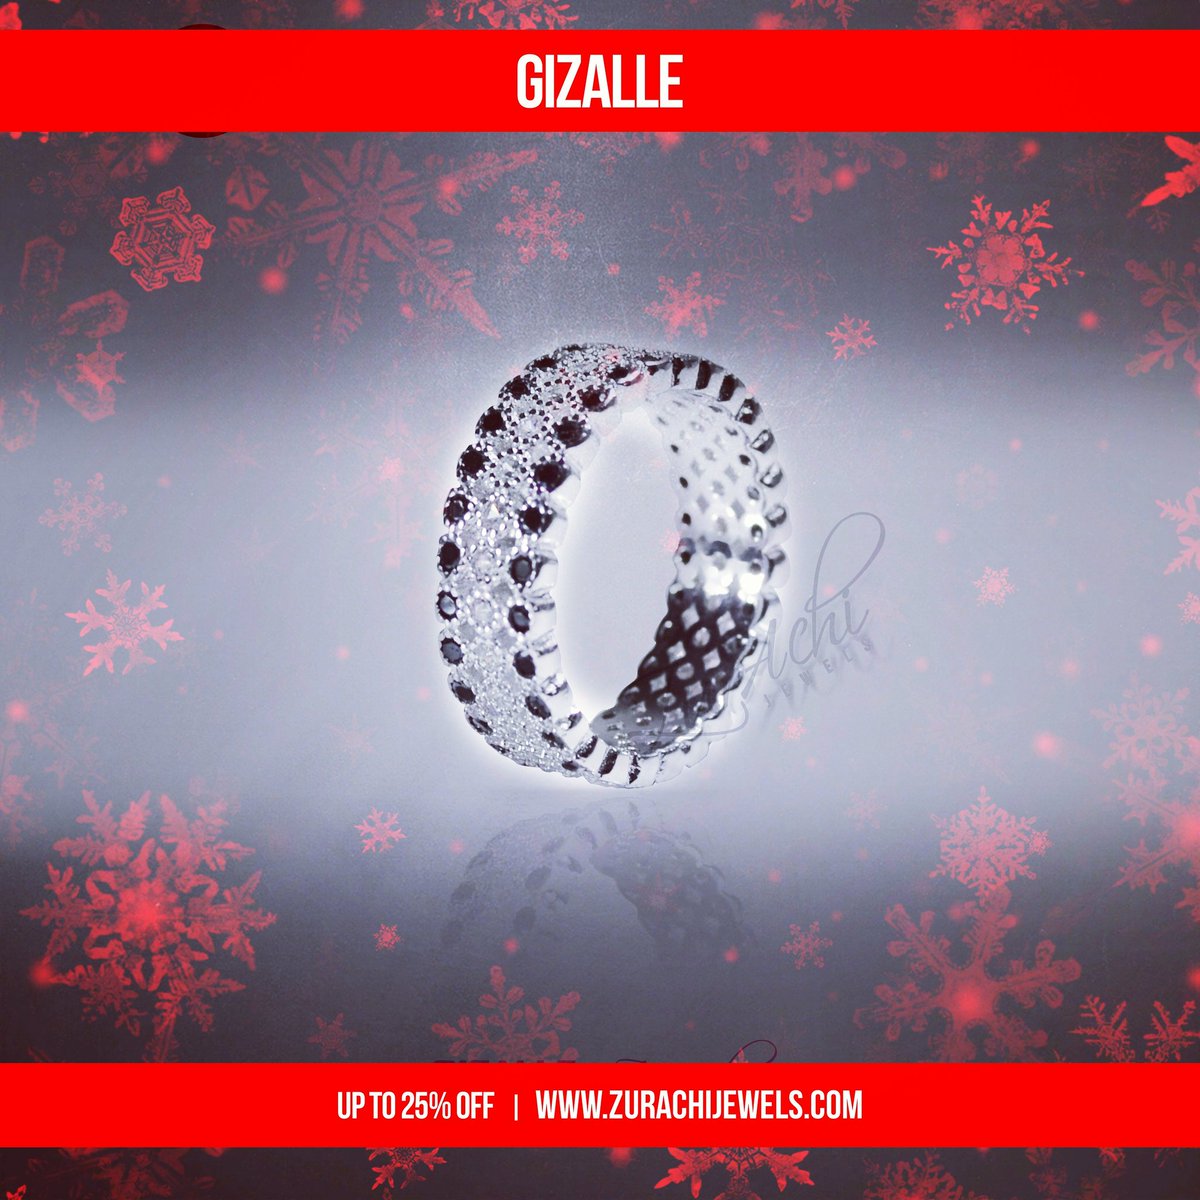 Don't miss out on Up to 25% off! 
ZurAchiJewels.com

#zurachijewels #sale #xmasgift #fairytaleproposal #xmassale #LastMinuteDeals